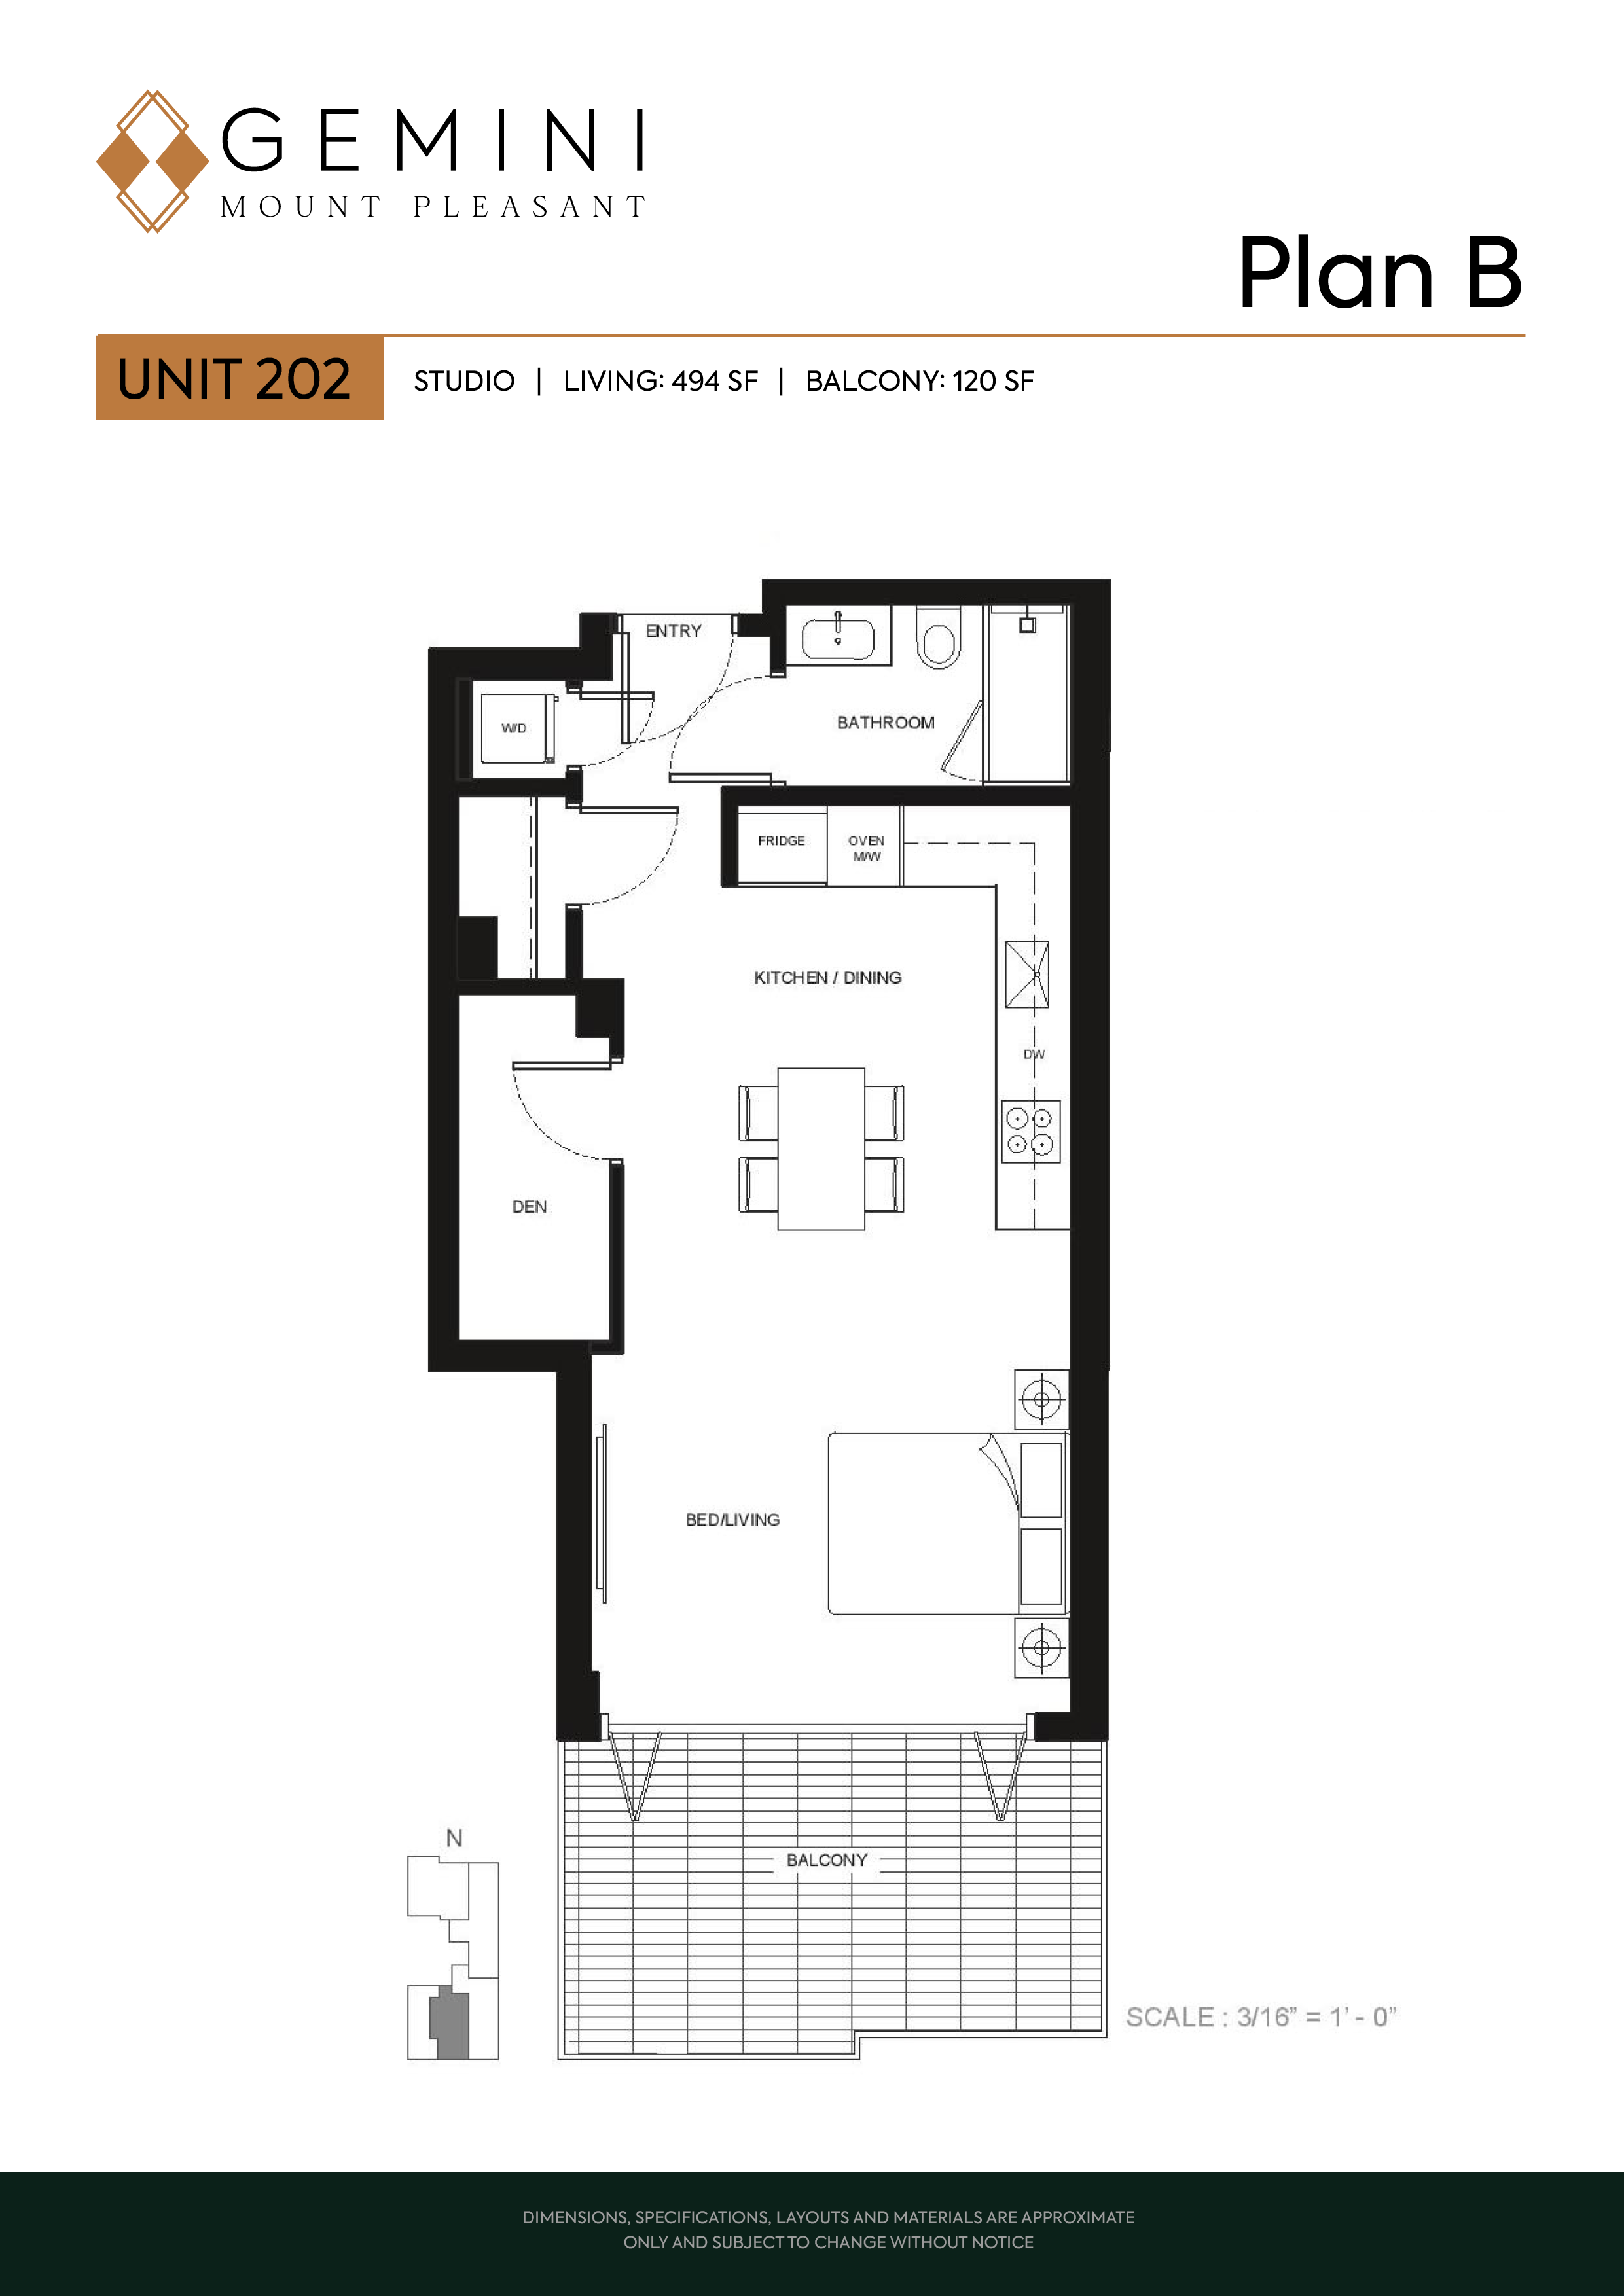 Plan B Floor Plan of Gemini Mount Pleasant Condos with undefined beds